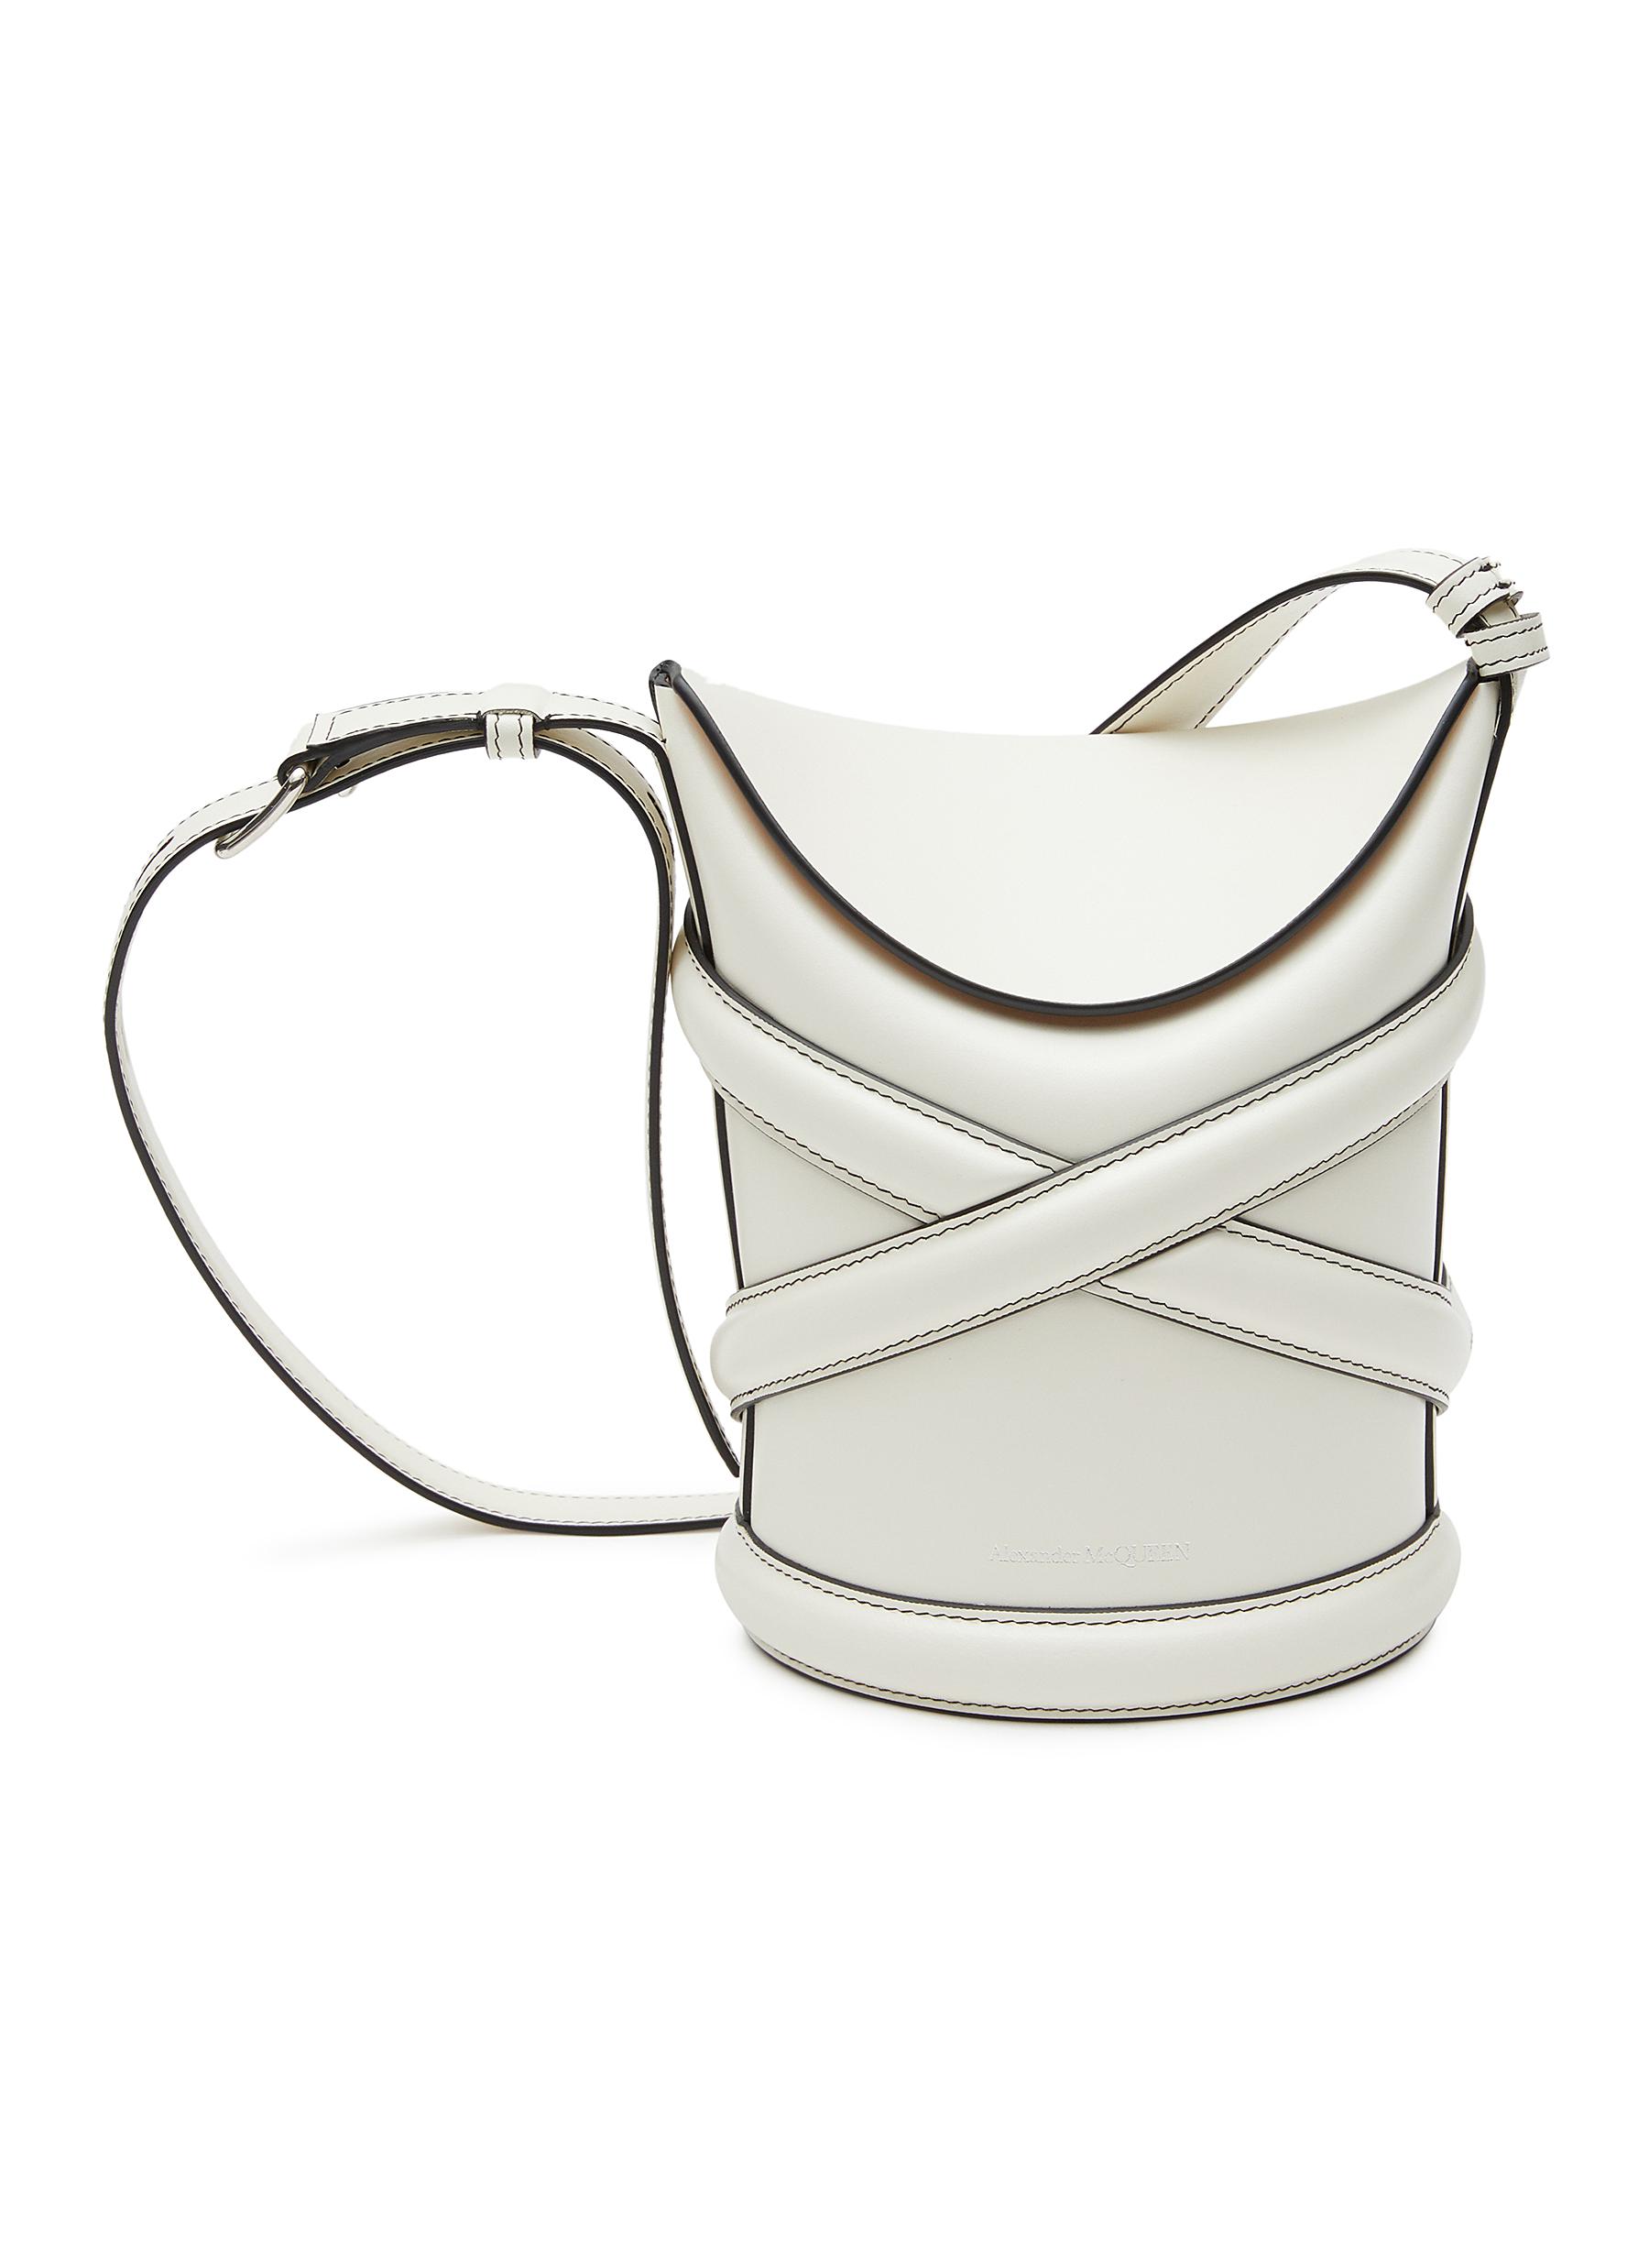 'THE CURVE' SMALL CALF LEATHER BUCKET BAG